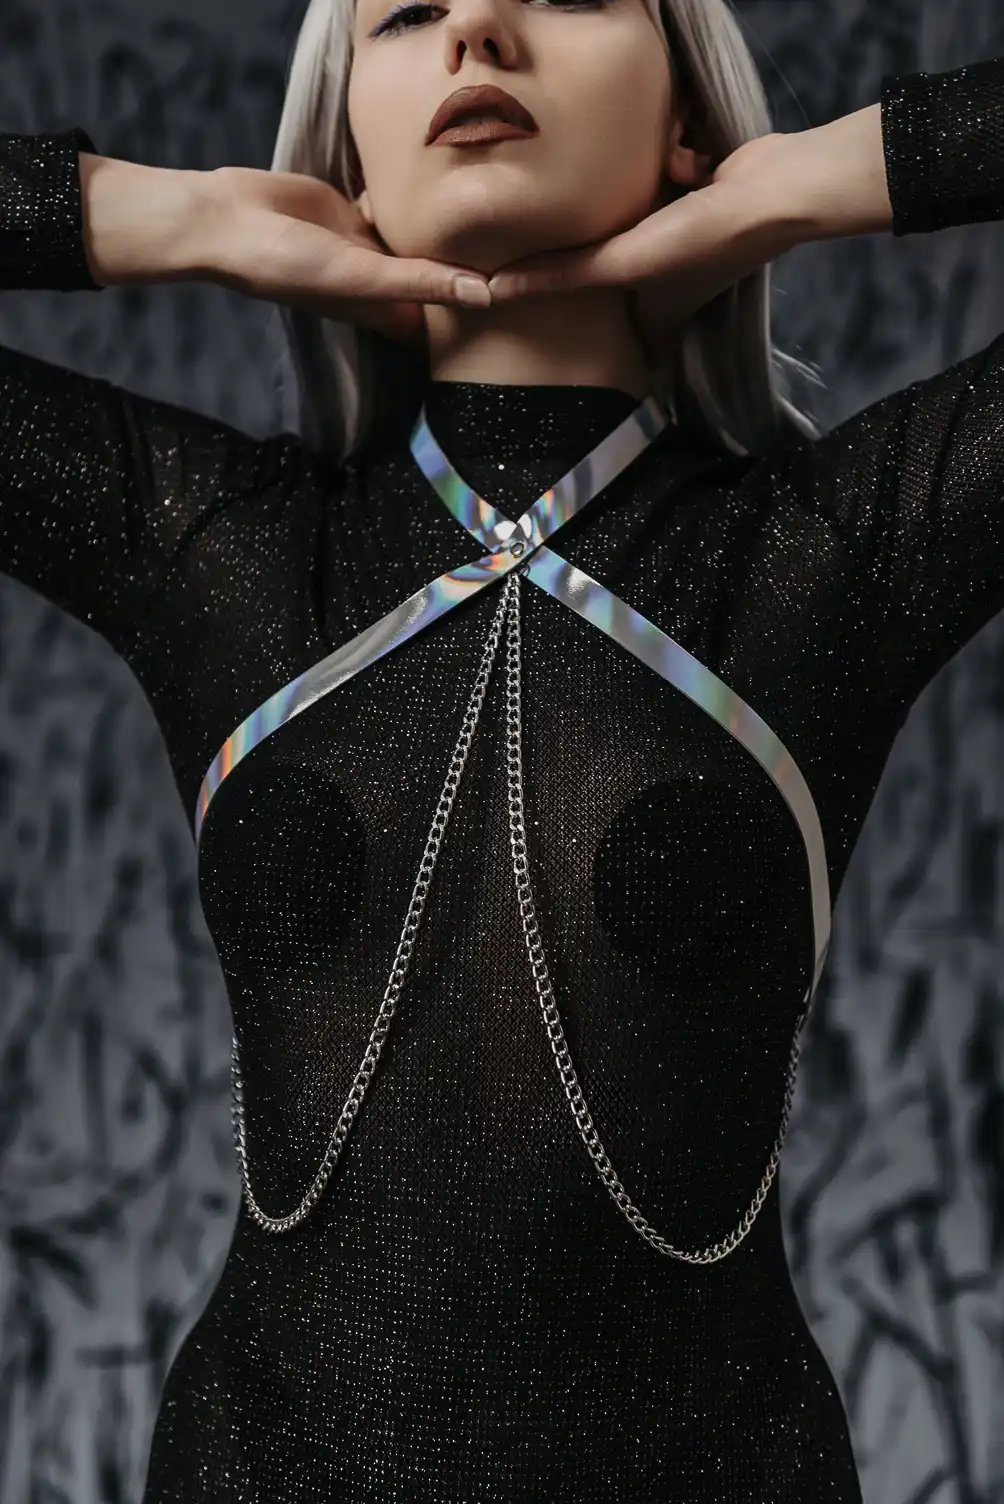 Handmade natural holographic leather body harness accessory with chains.